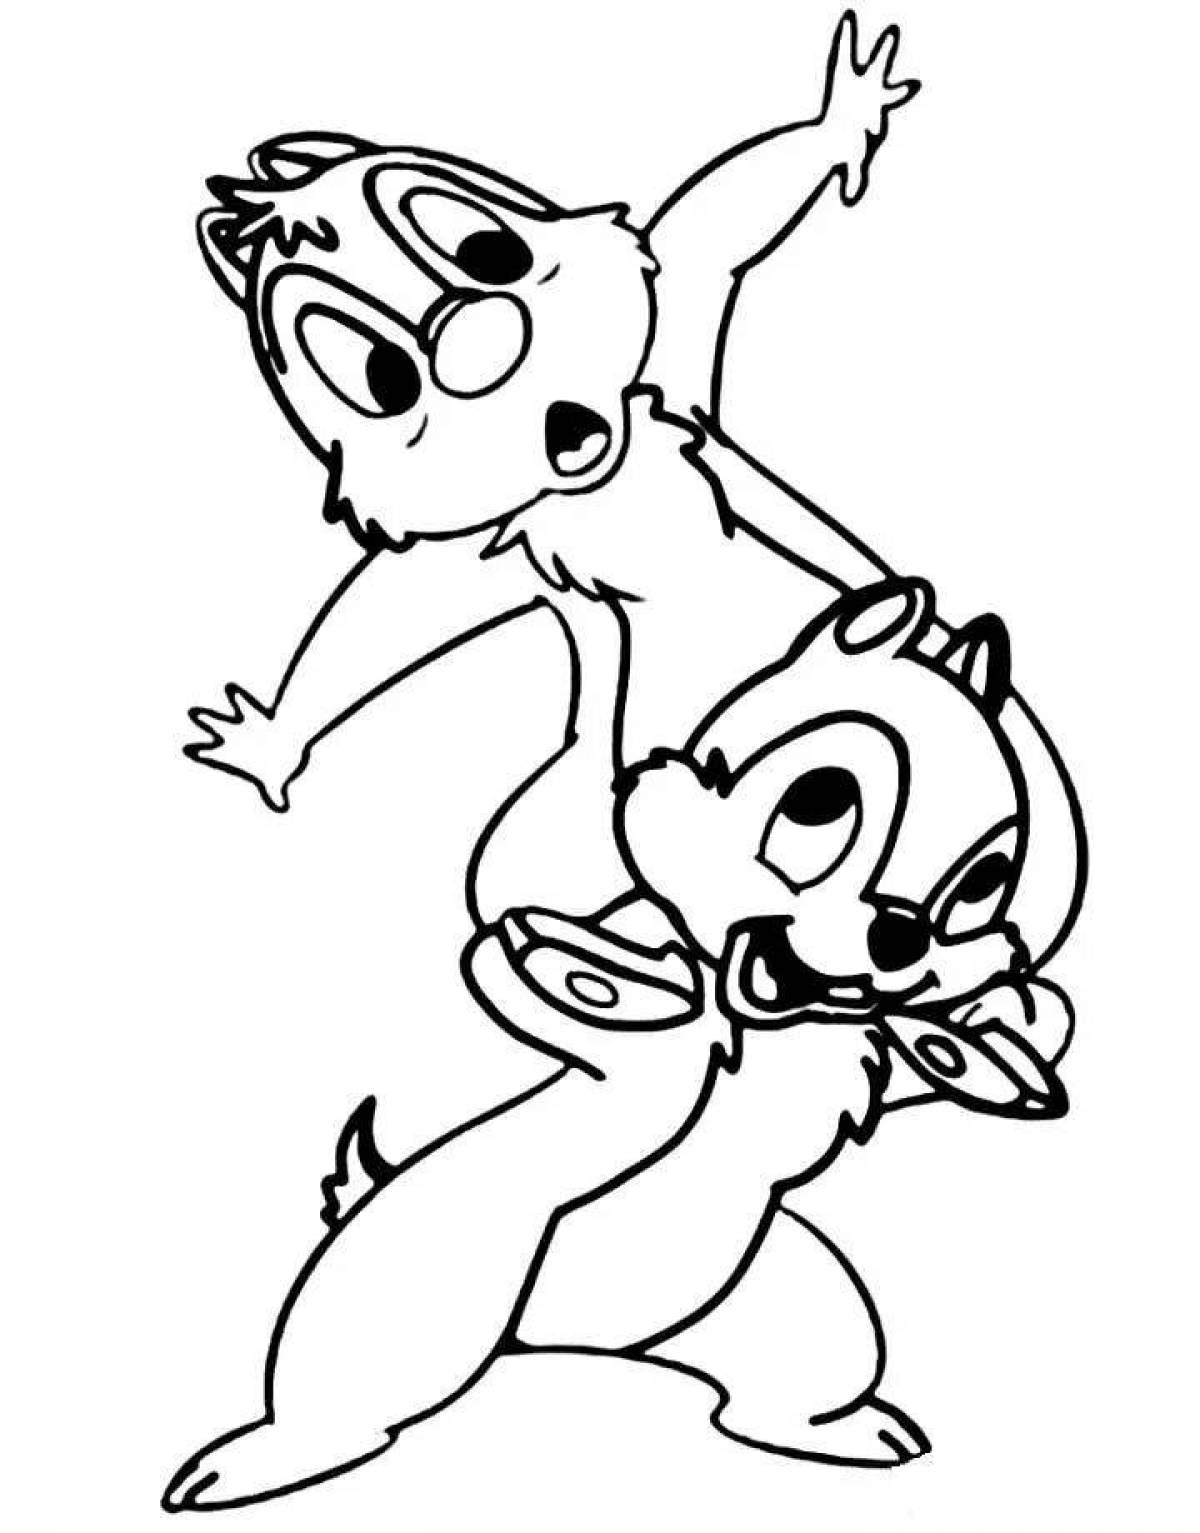 Chip and dale fun coloring